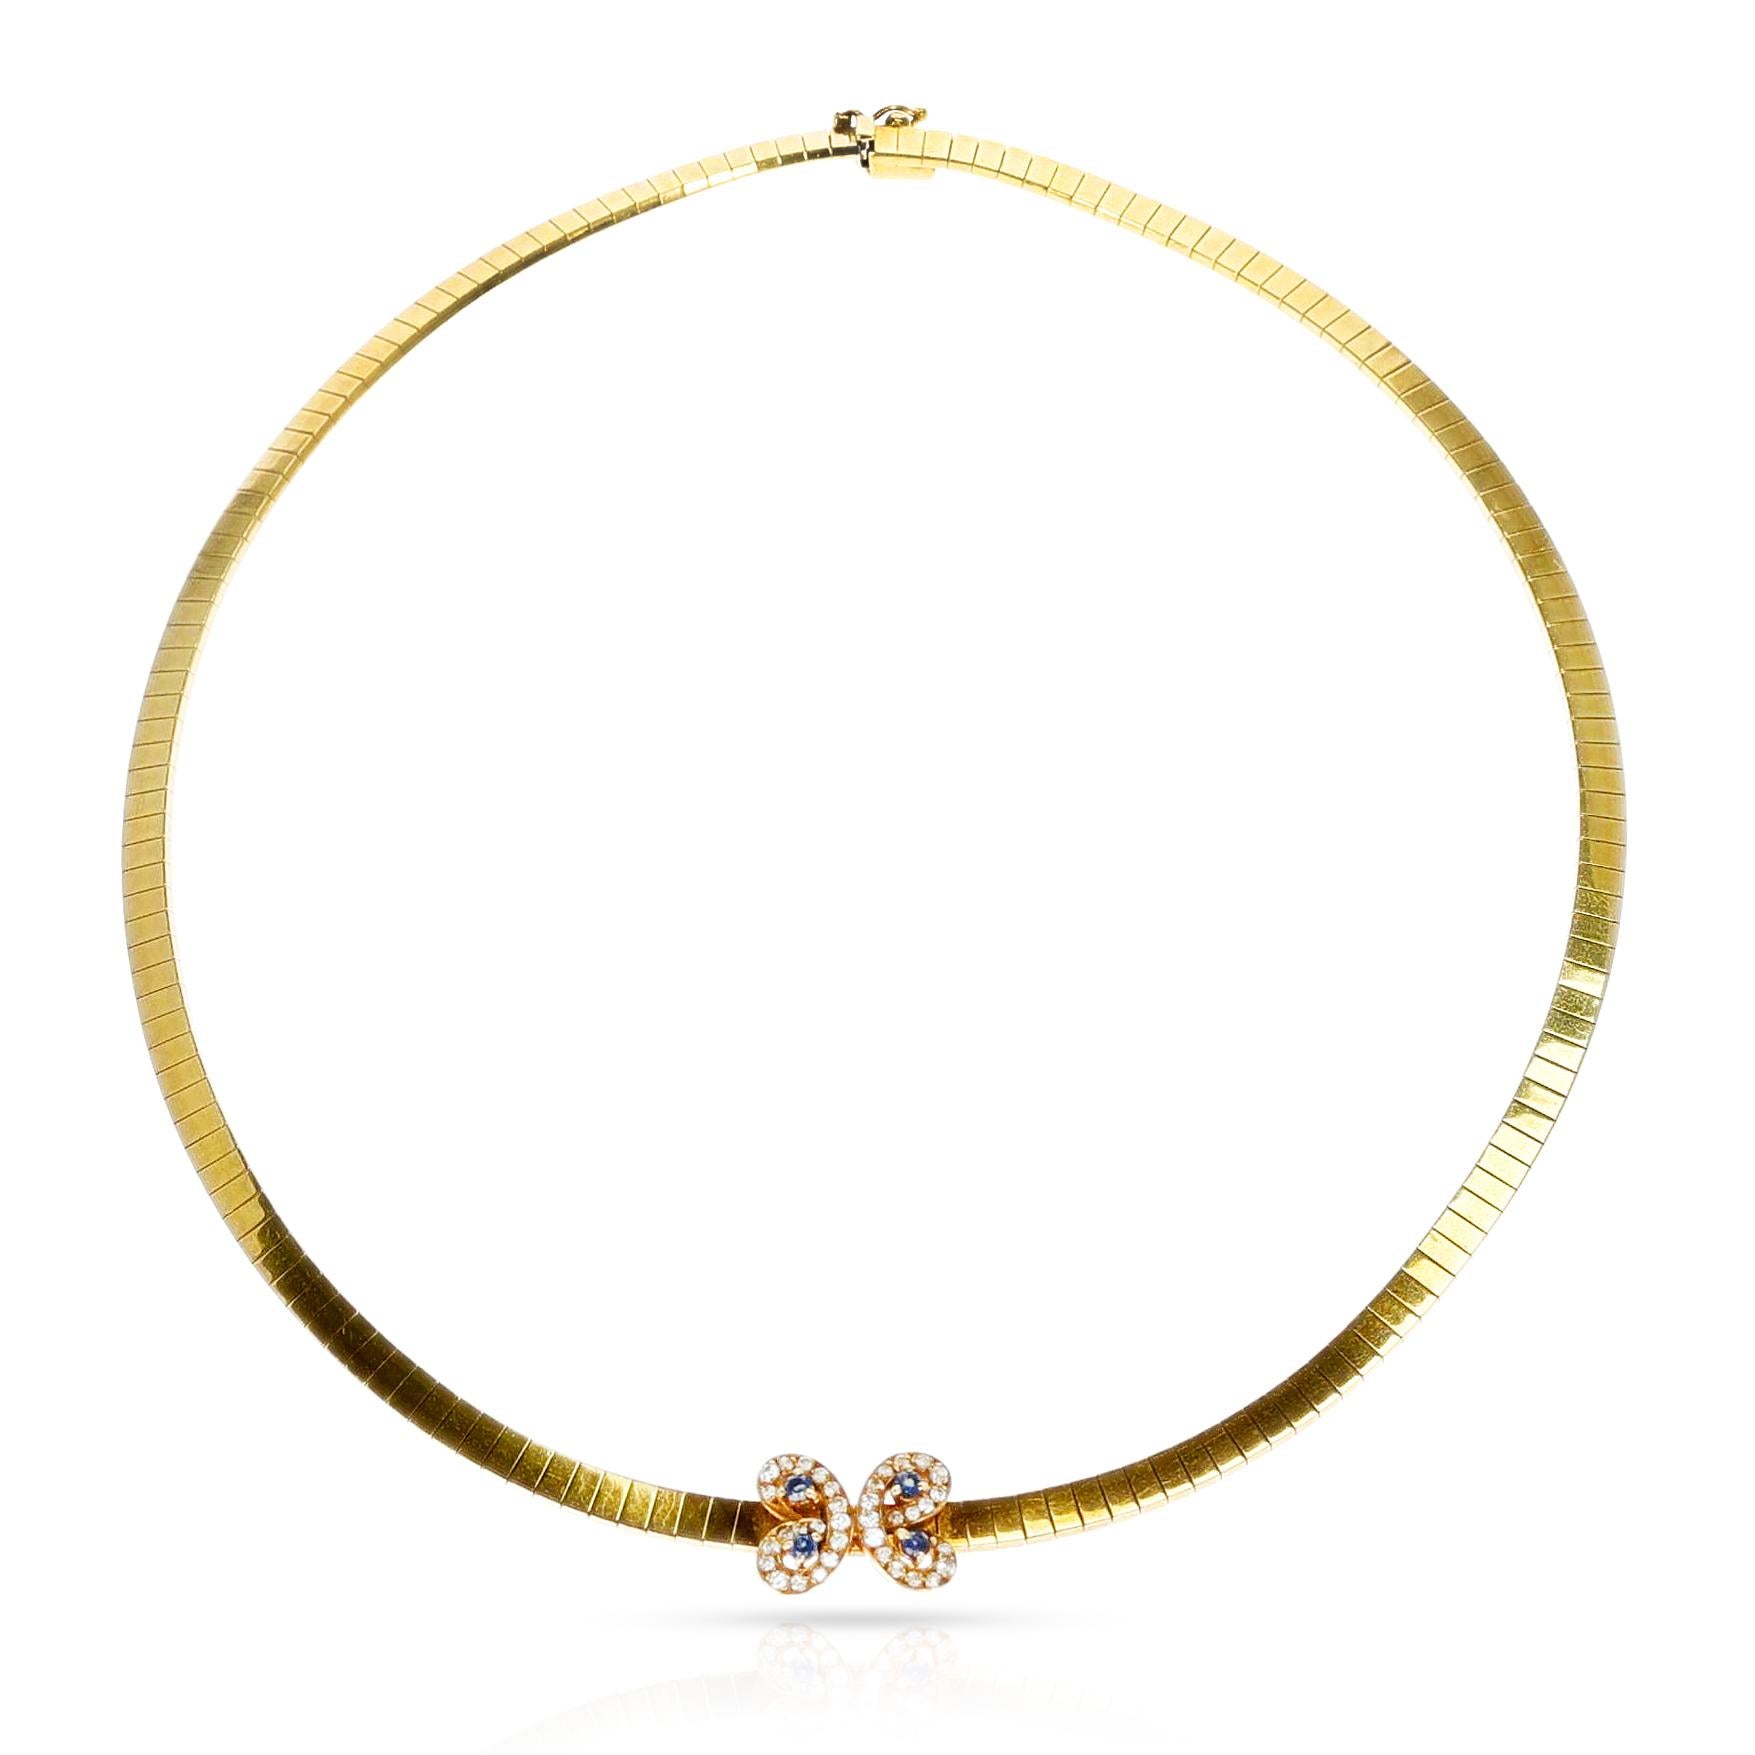 This Van Cleef & Arpels Butterfly Sapphire and Diamond Choker Necklace is crafted in 18k yellow gold and showcases a butterfly design inlaid with round sapphires and round brilliant diamonds. Expertly balanced in weight and design, this